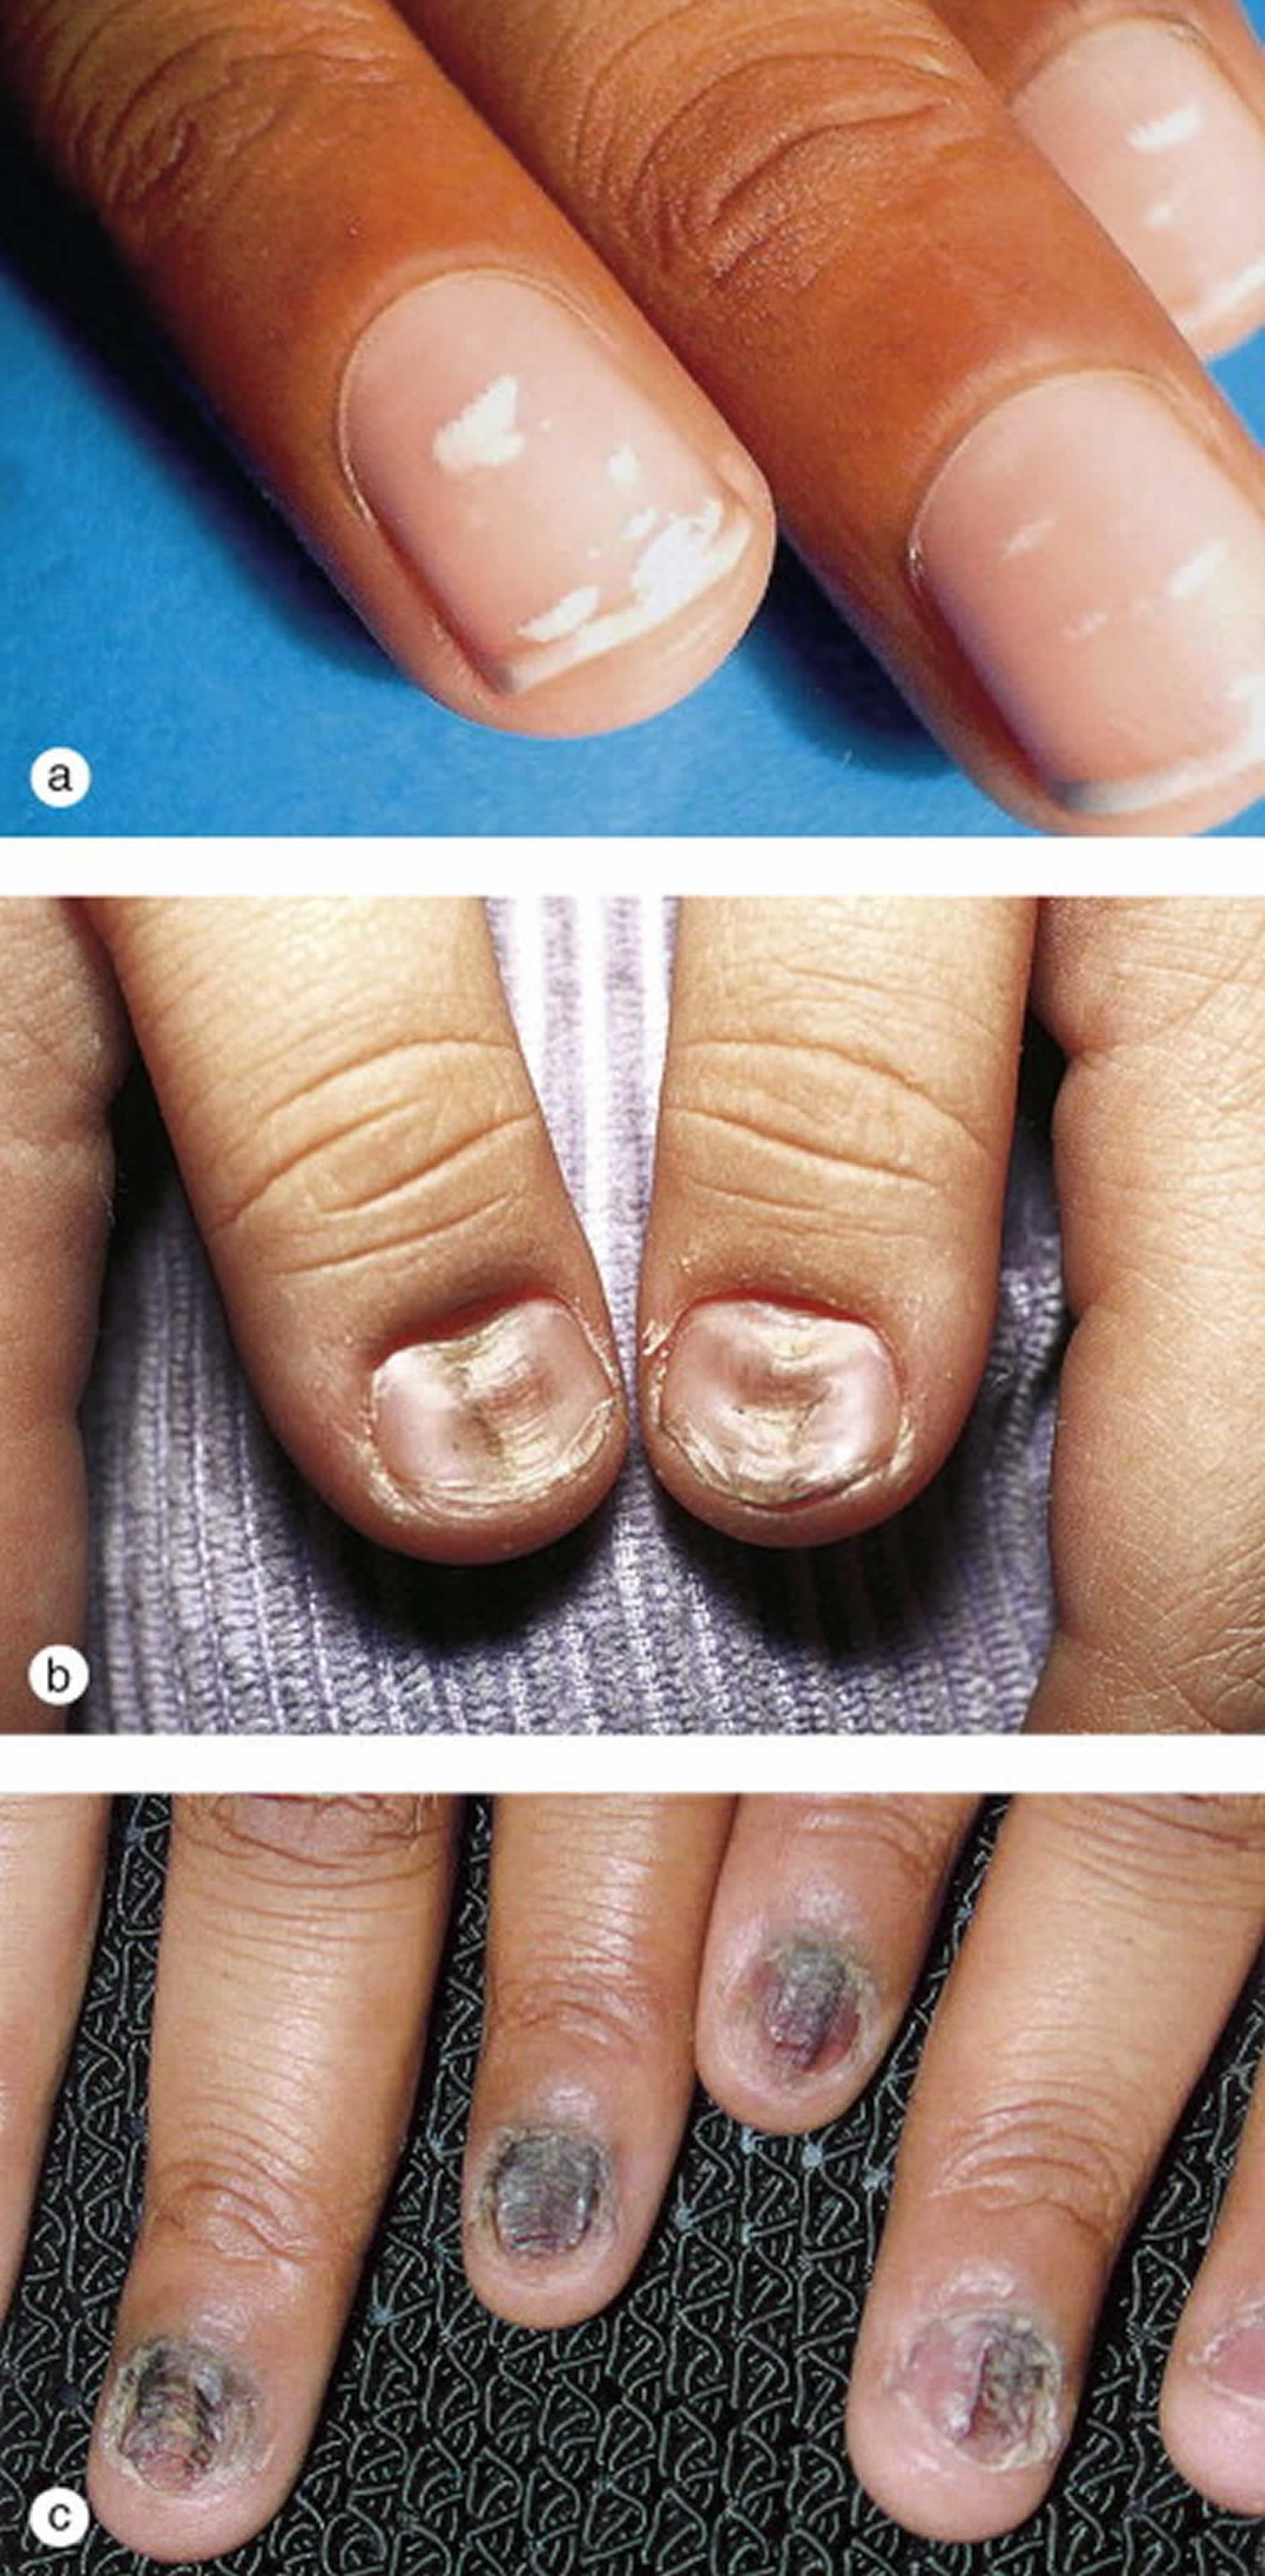 Clinical Study of various Nail Disorders presenting to Dermatology  Outpatient Department